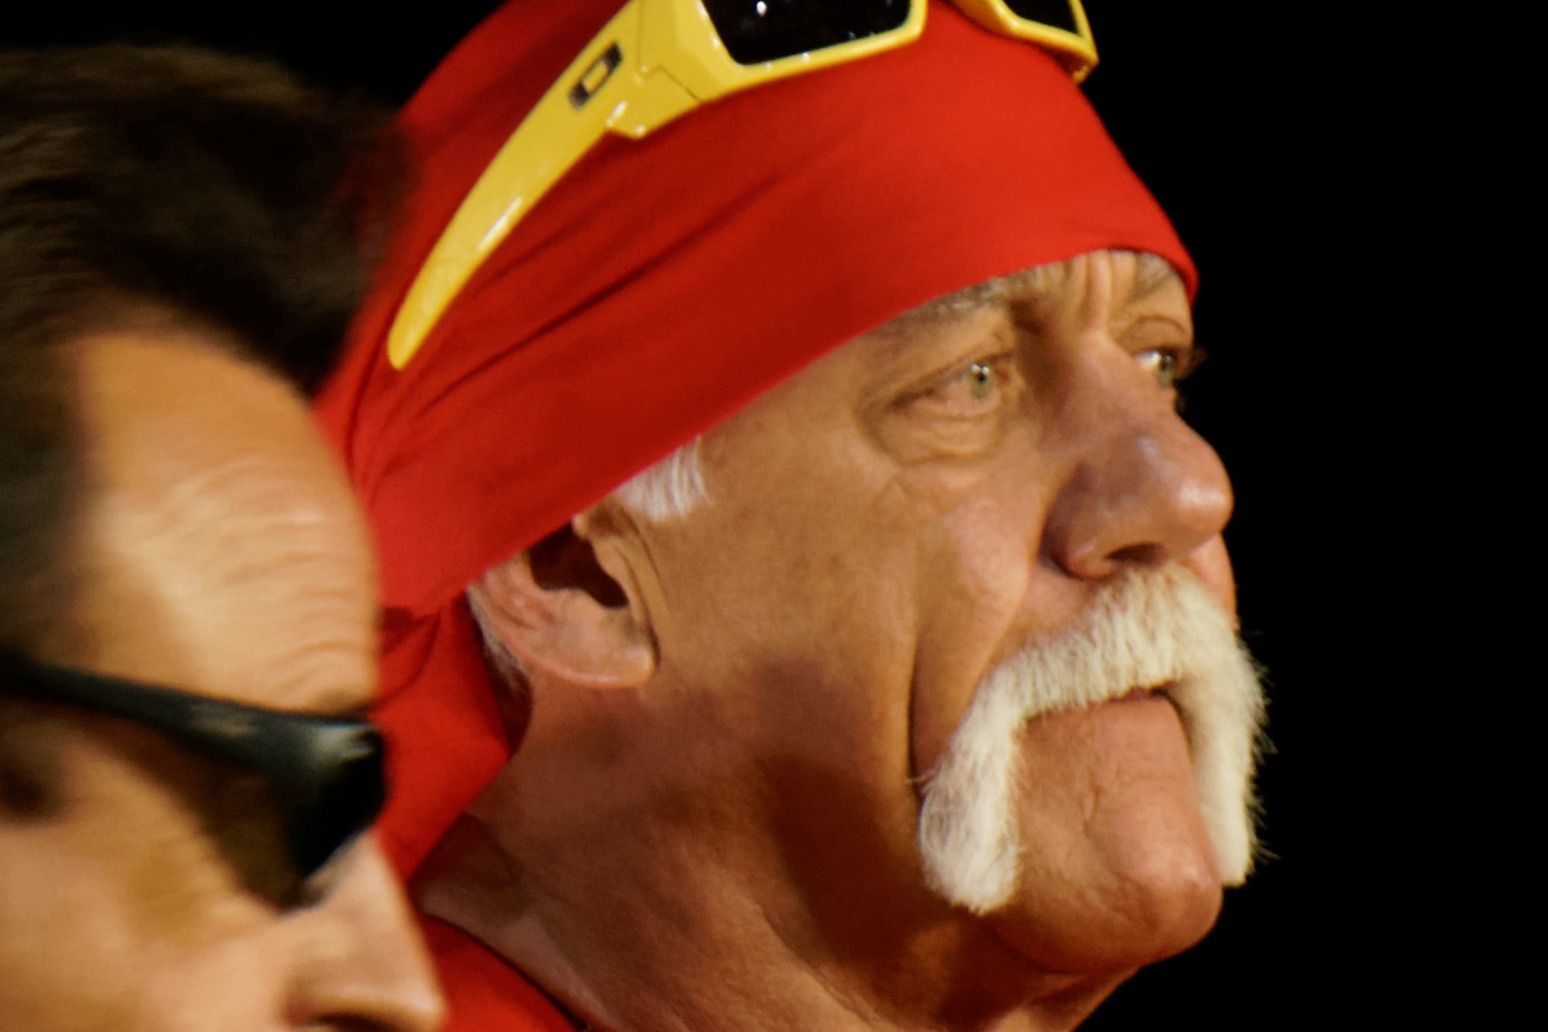 Hulk Hogan announces divorce from second wife as he confirms new relationship 